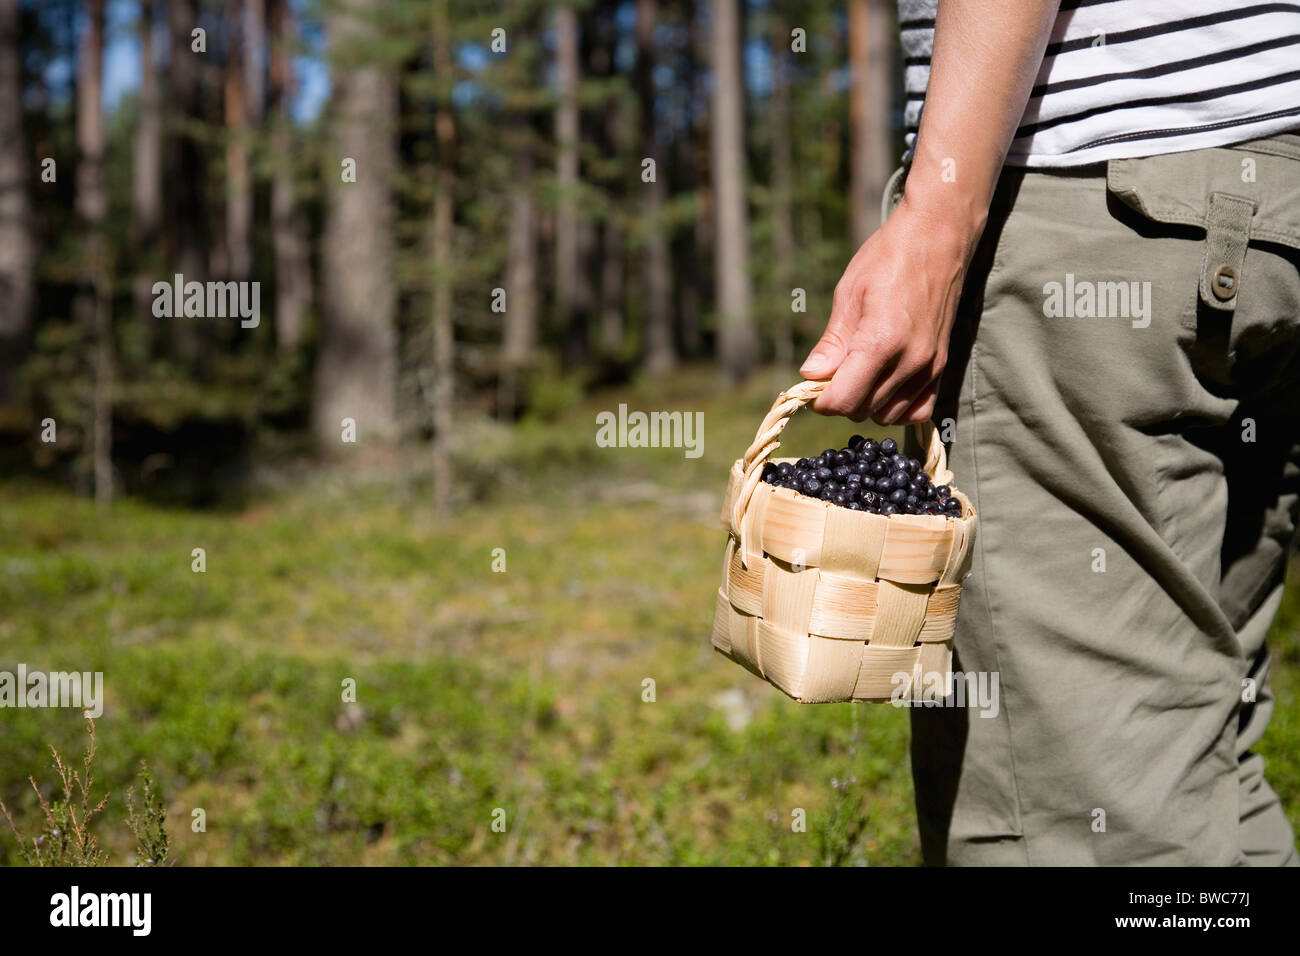 Woman with blueberries in basket Stock Photo